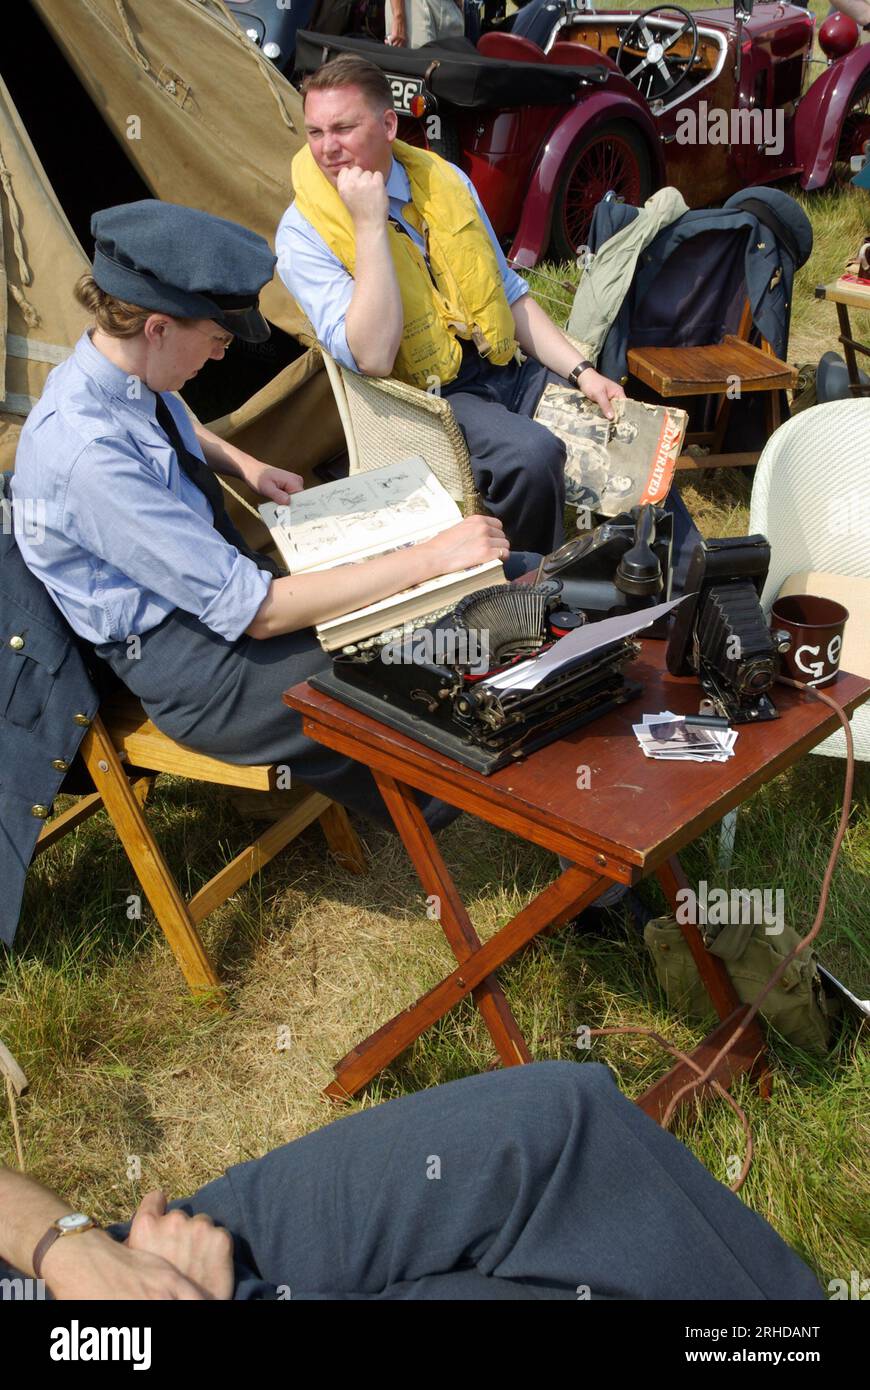 Re-enactment of pilots and other trades passing the time on a Second World War airfield during the Battle of Britain, at Biggin Hill, UK. Waiting Stock Photo